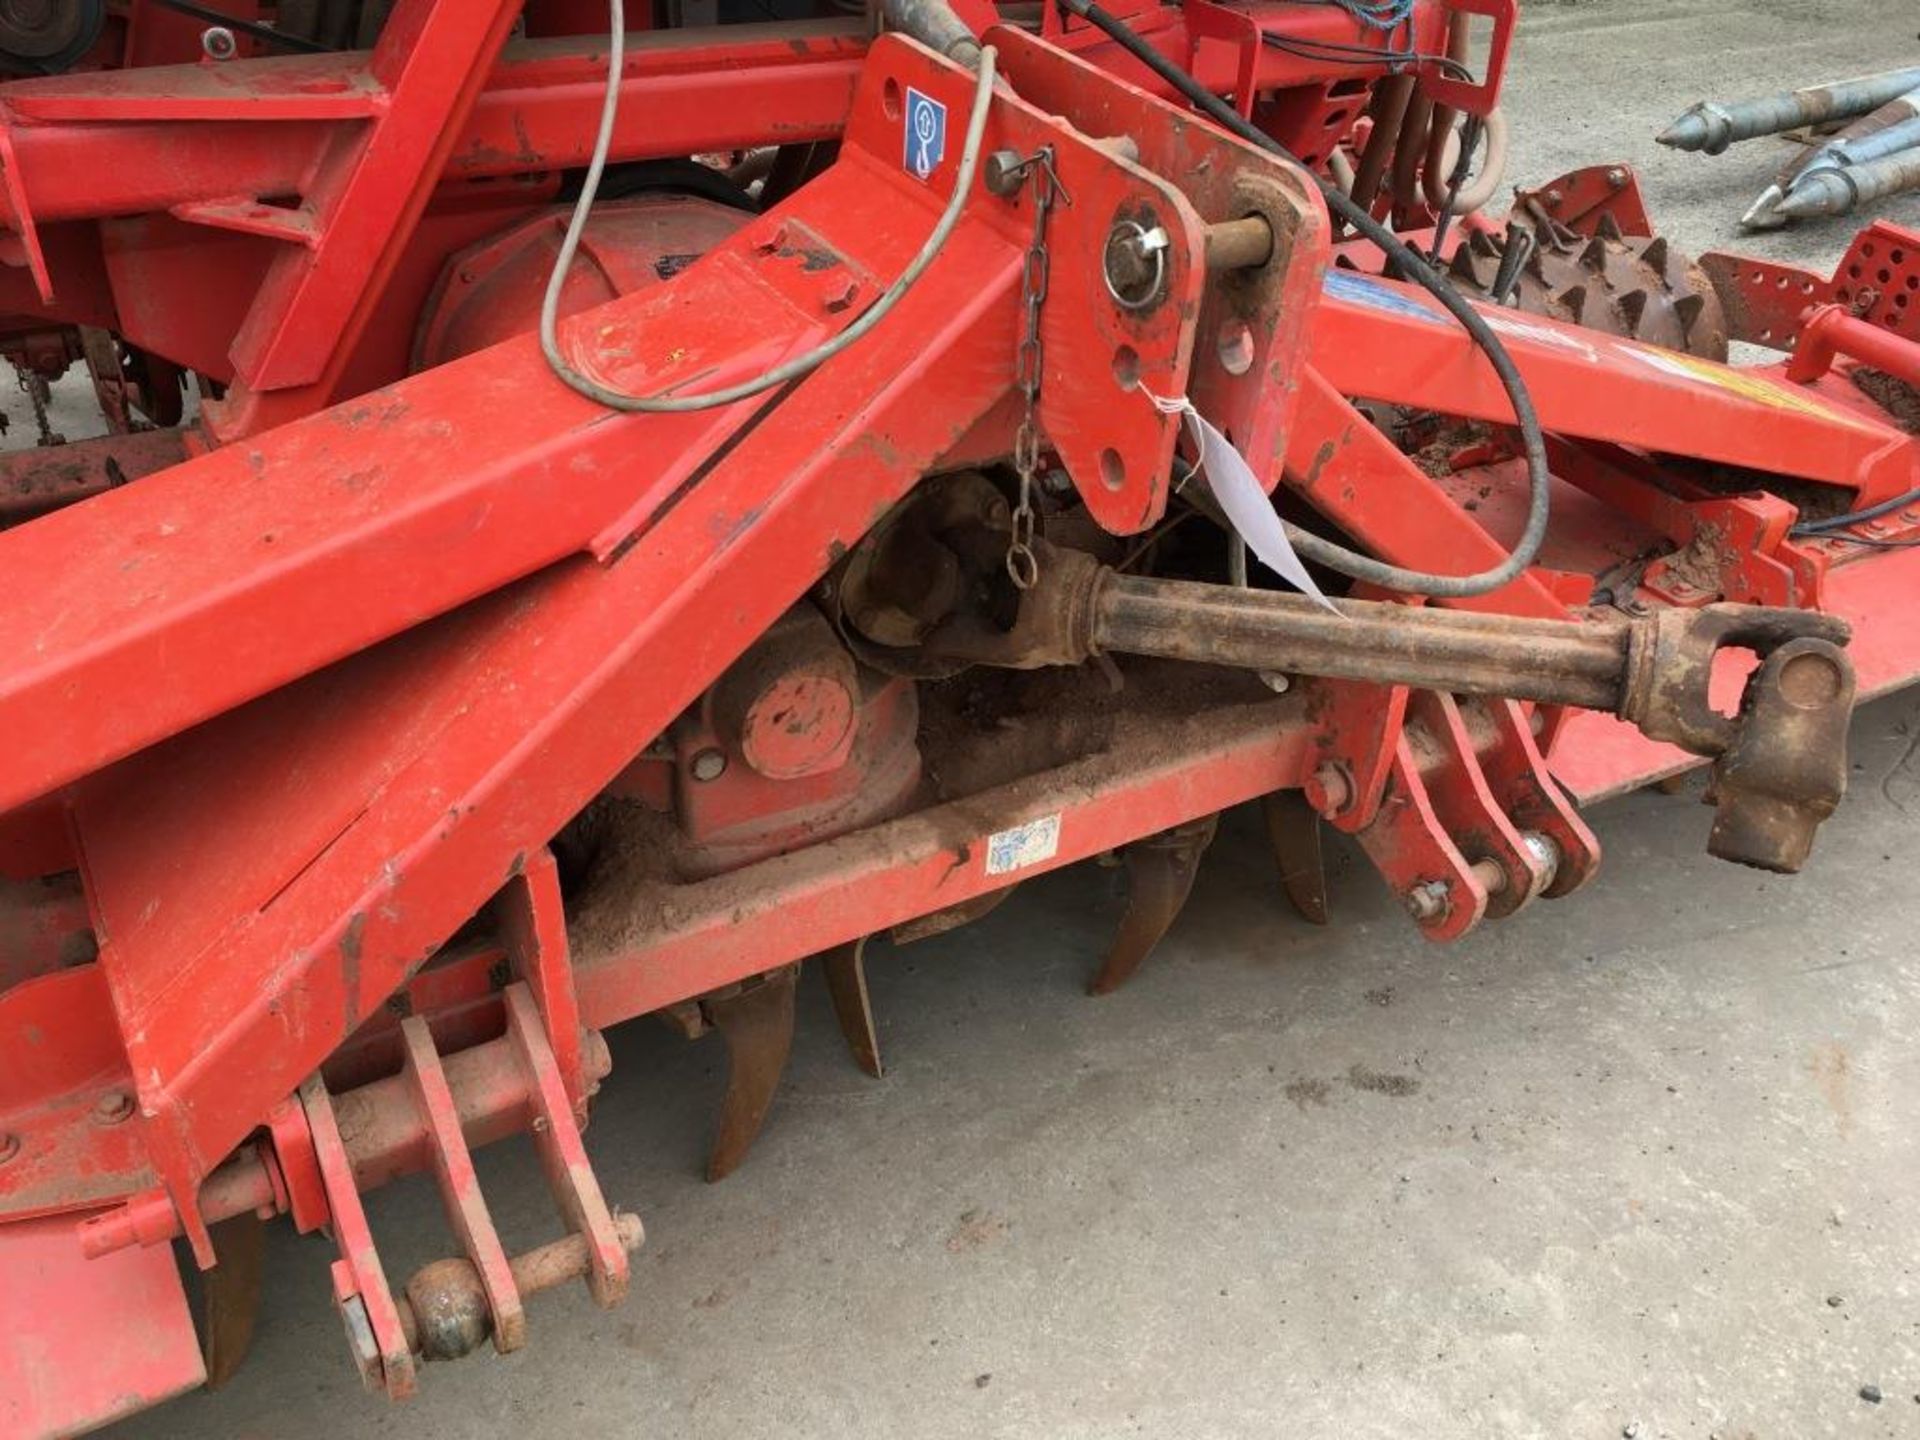 Kuhn HR 4003D 14' power harrow, serial number: A4631 (2002) with Kuhn Venta LC 402 seed drill, - Bild 6 aus 15